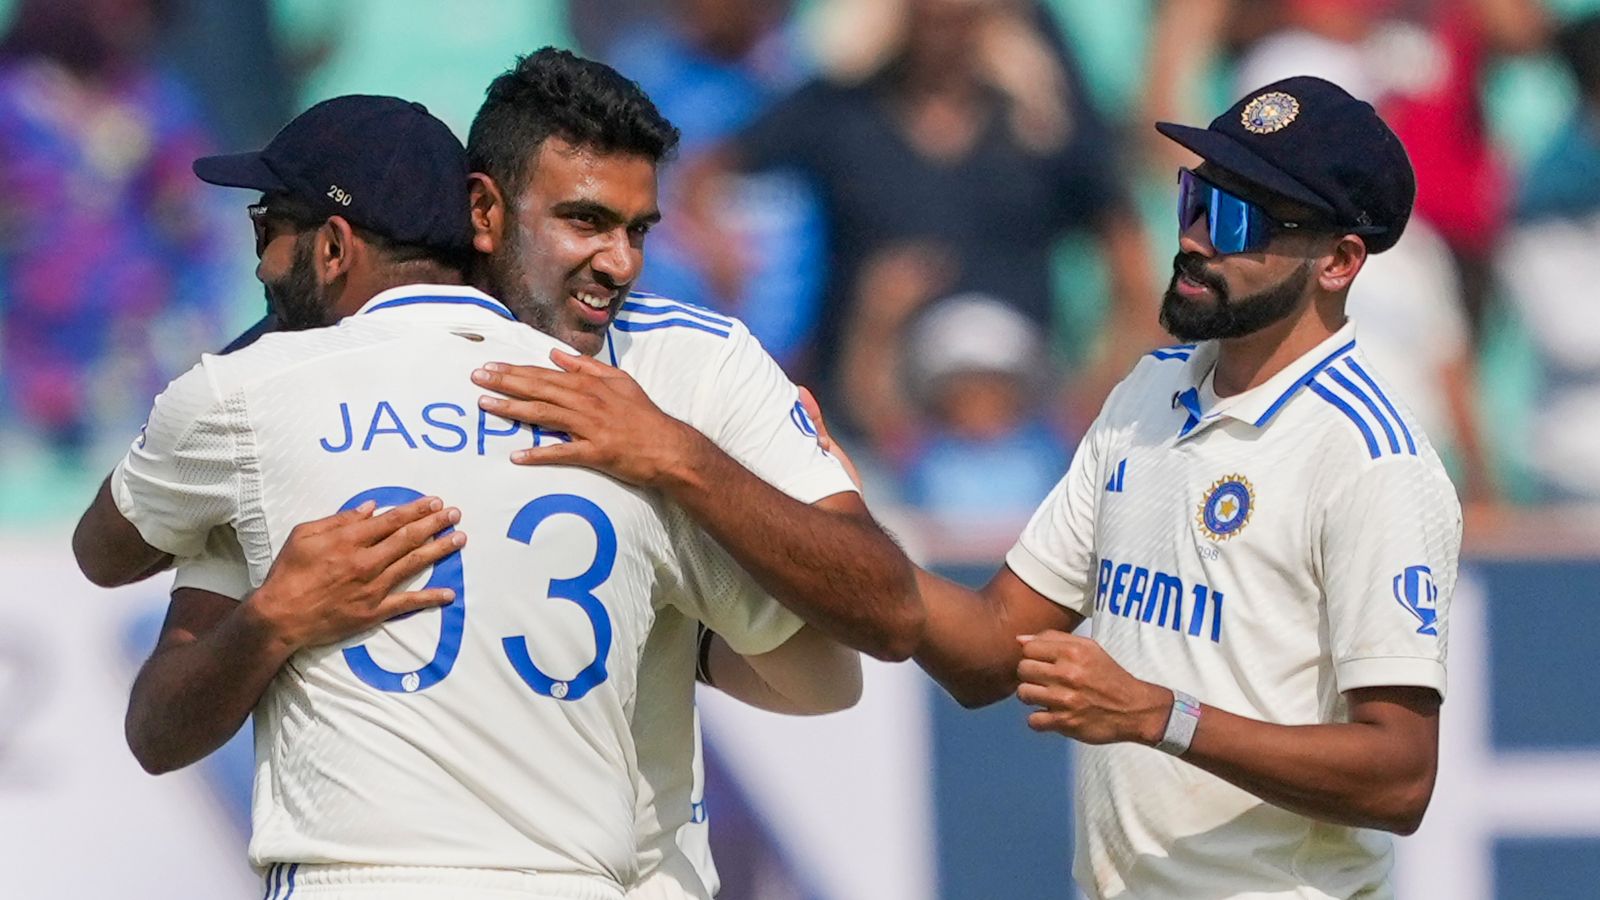 android, ashwin’s father ravichandran on his son’s 500th test wicket: ‘turning point was his mother’s idea to switch to spin bowling because of wheezing’